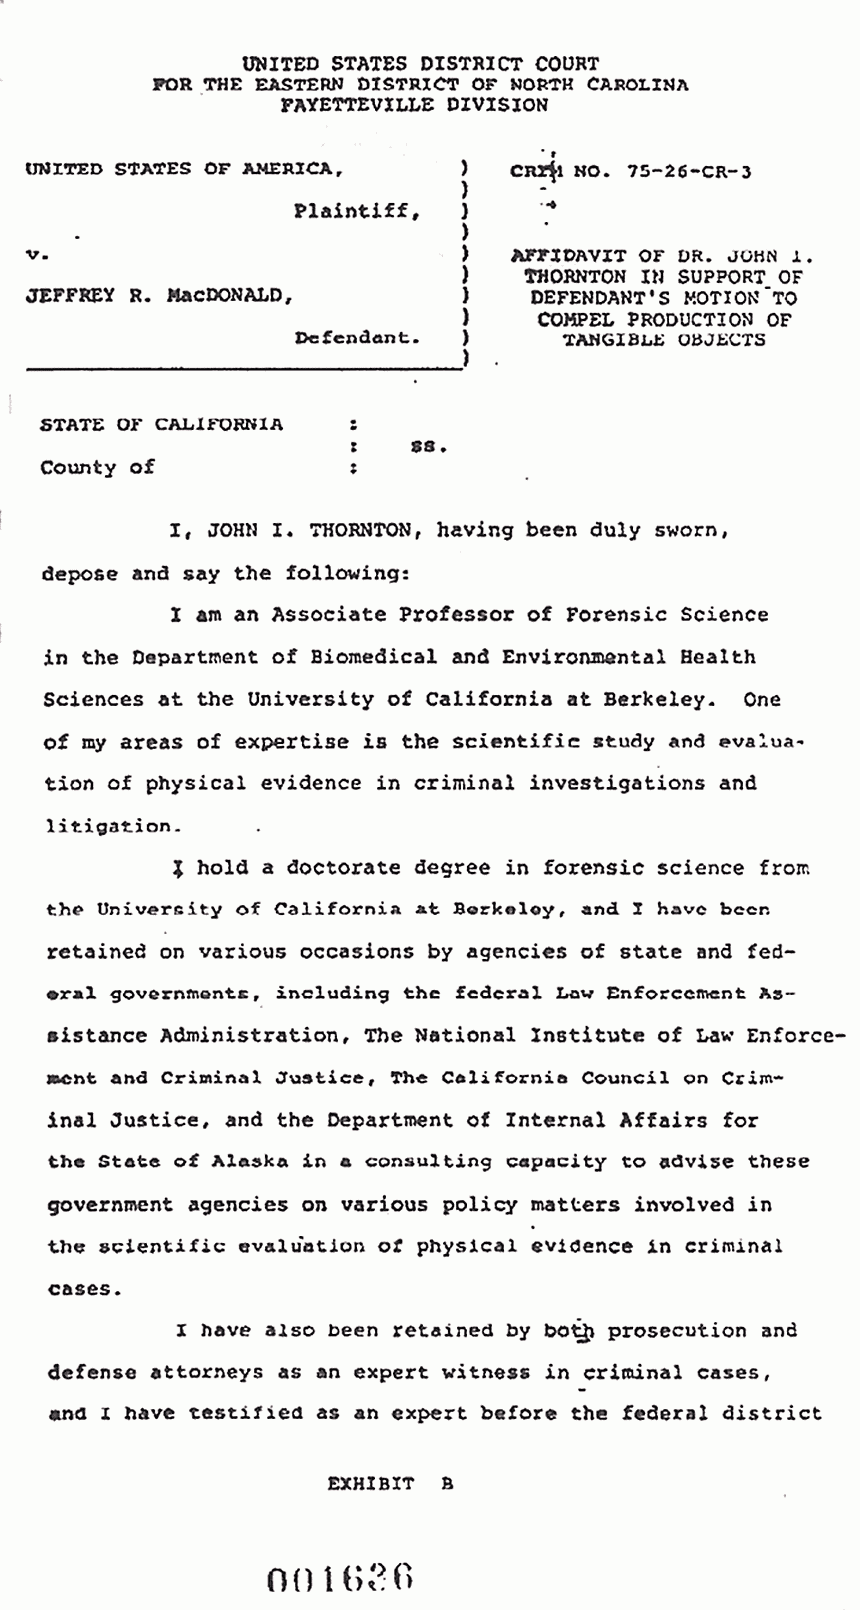 March 26, 1979: Affidavit of Dr. John Thornton in Support of Defendant's Motion to Compel production of Tangible Objects, p. 1 of 5